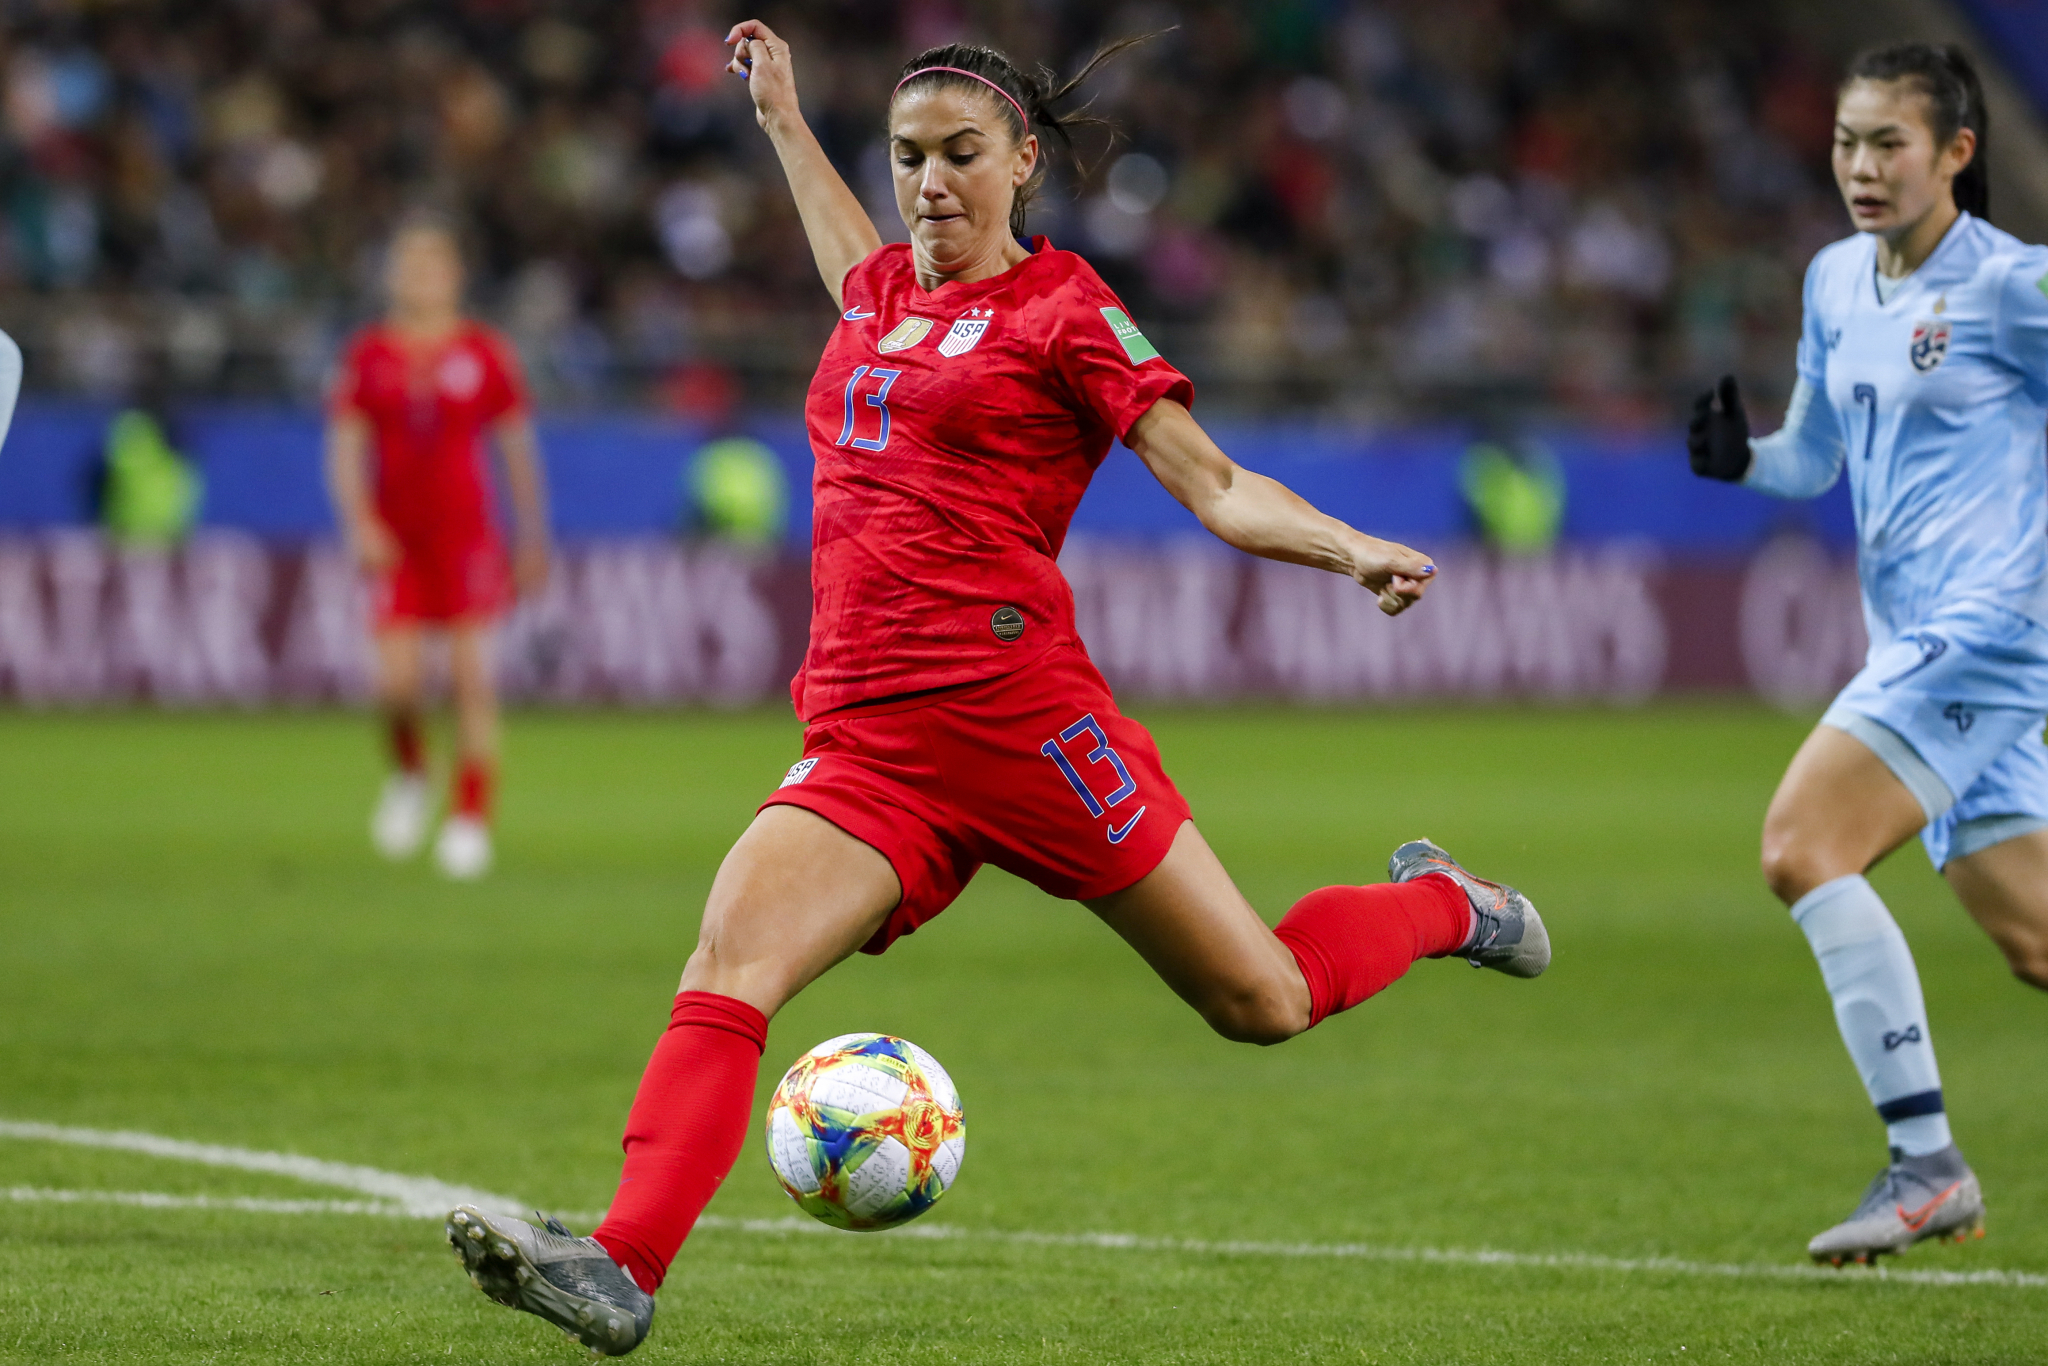 Alex Morgan has 5 goals as US routs Thailand 13-0 in Women’s World Cup